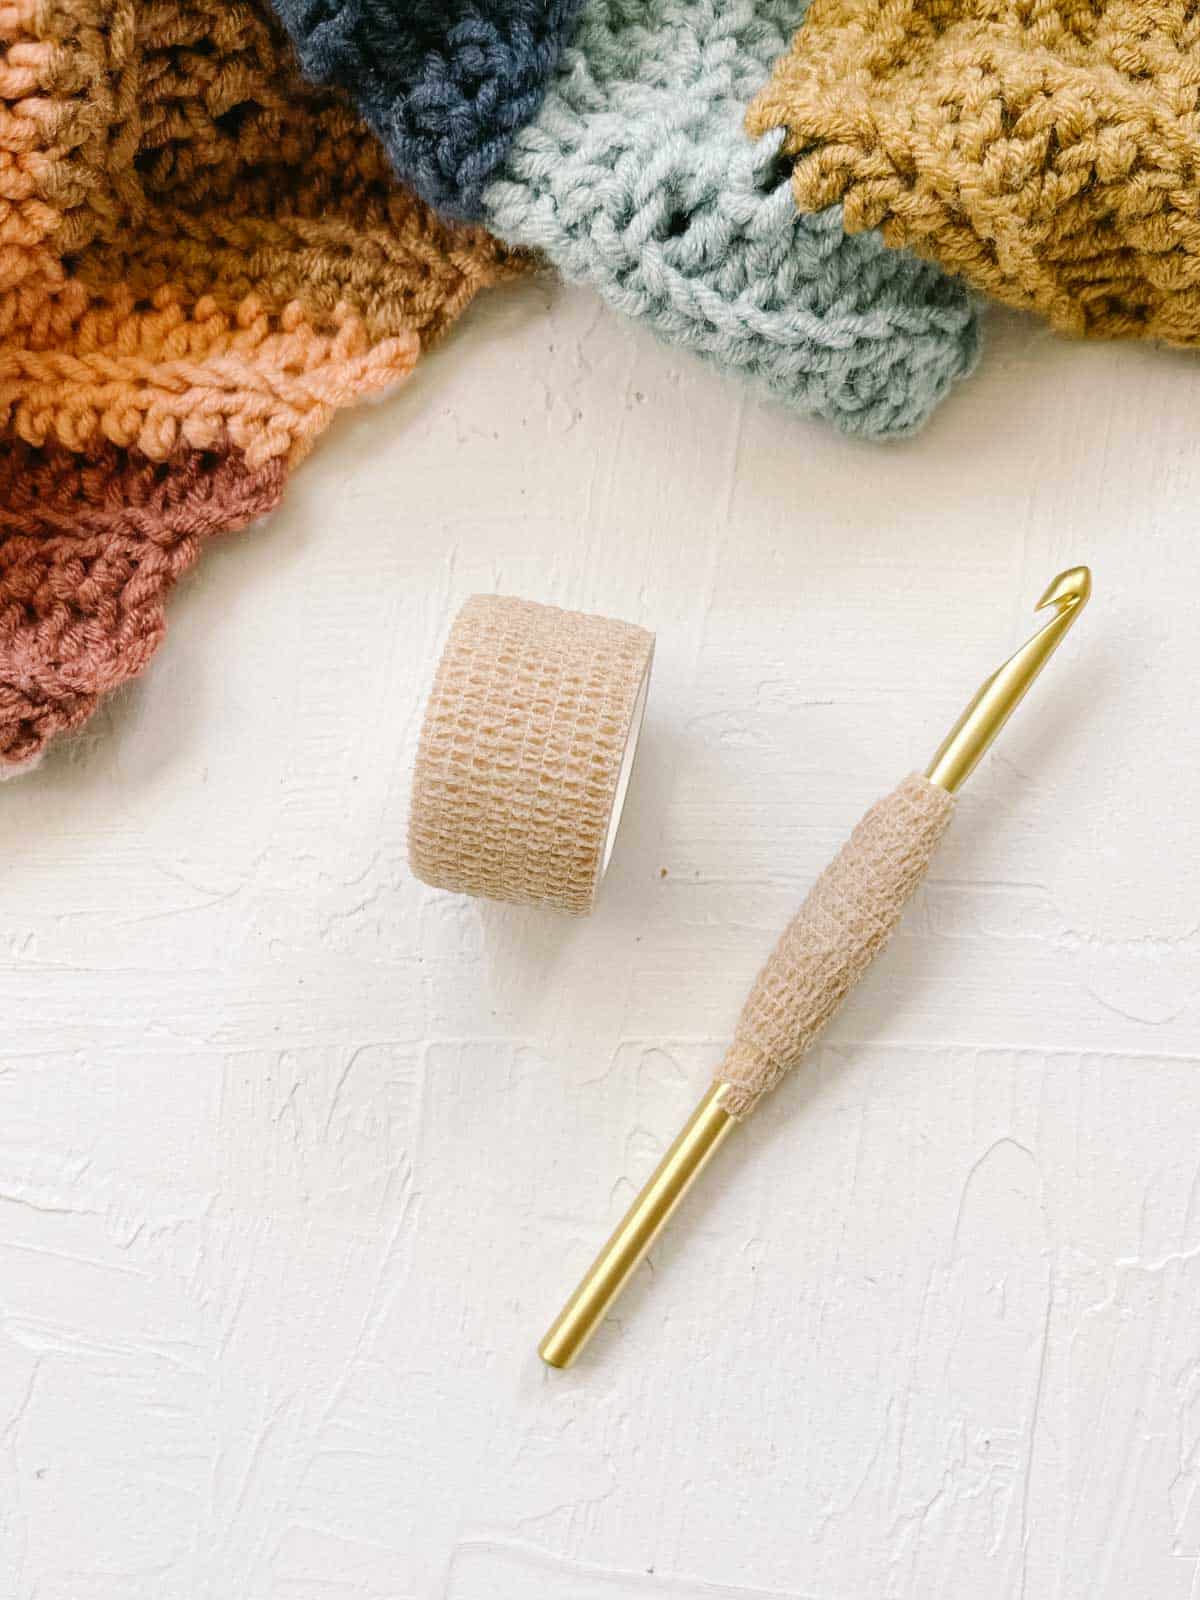 Making an ergonomic crochet handle with a tensor bandage for added comfort.